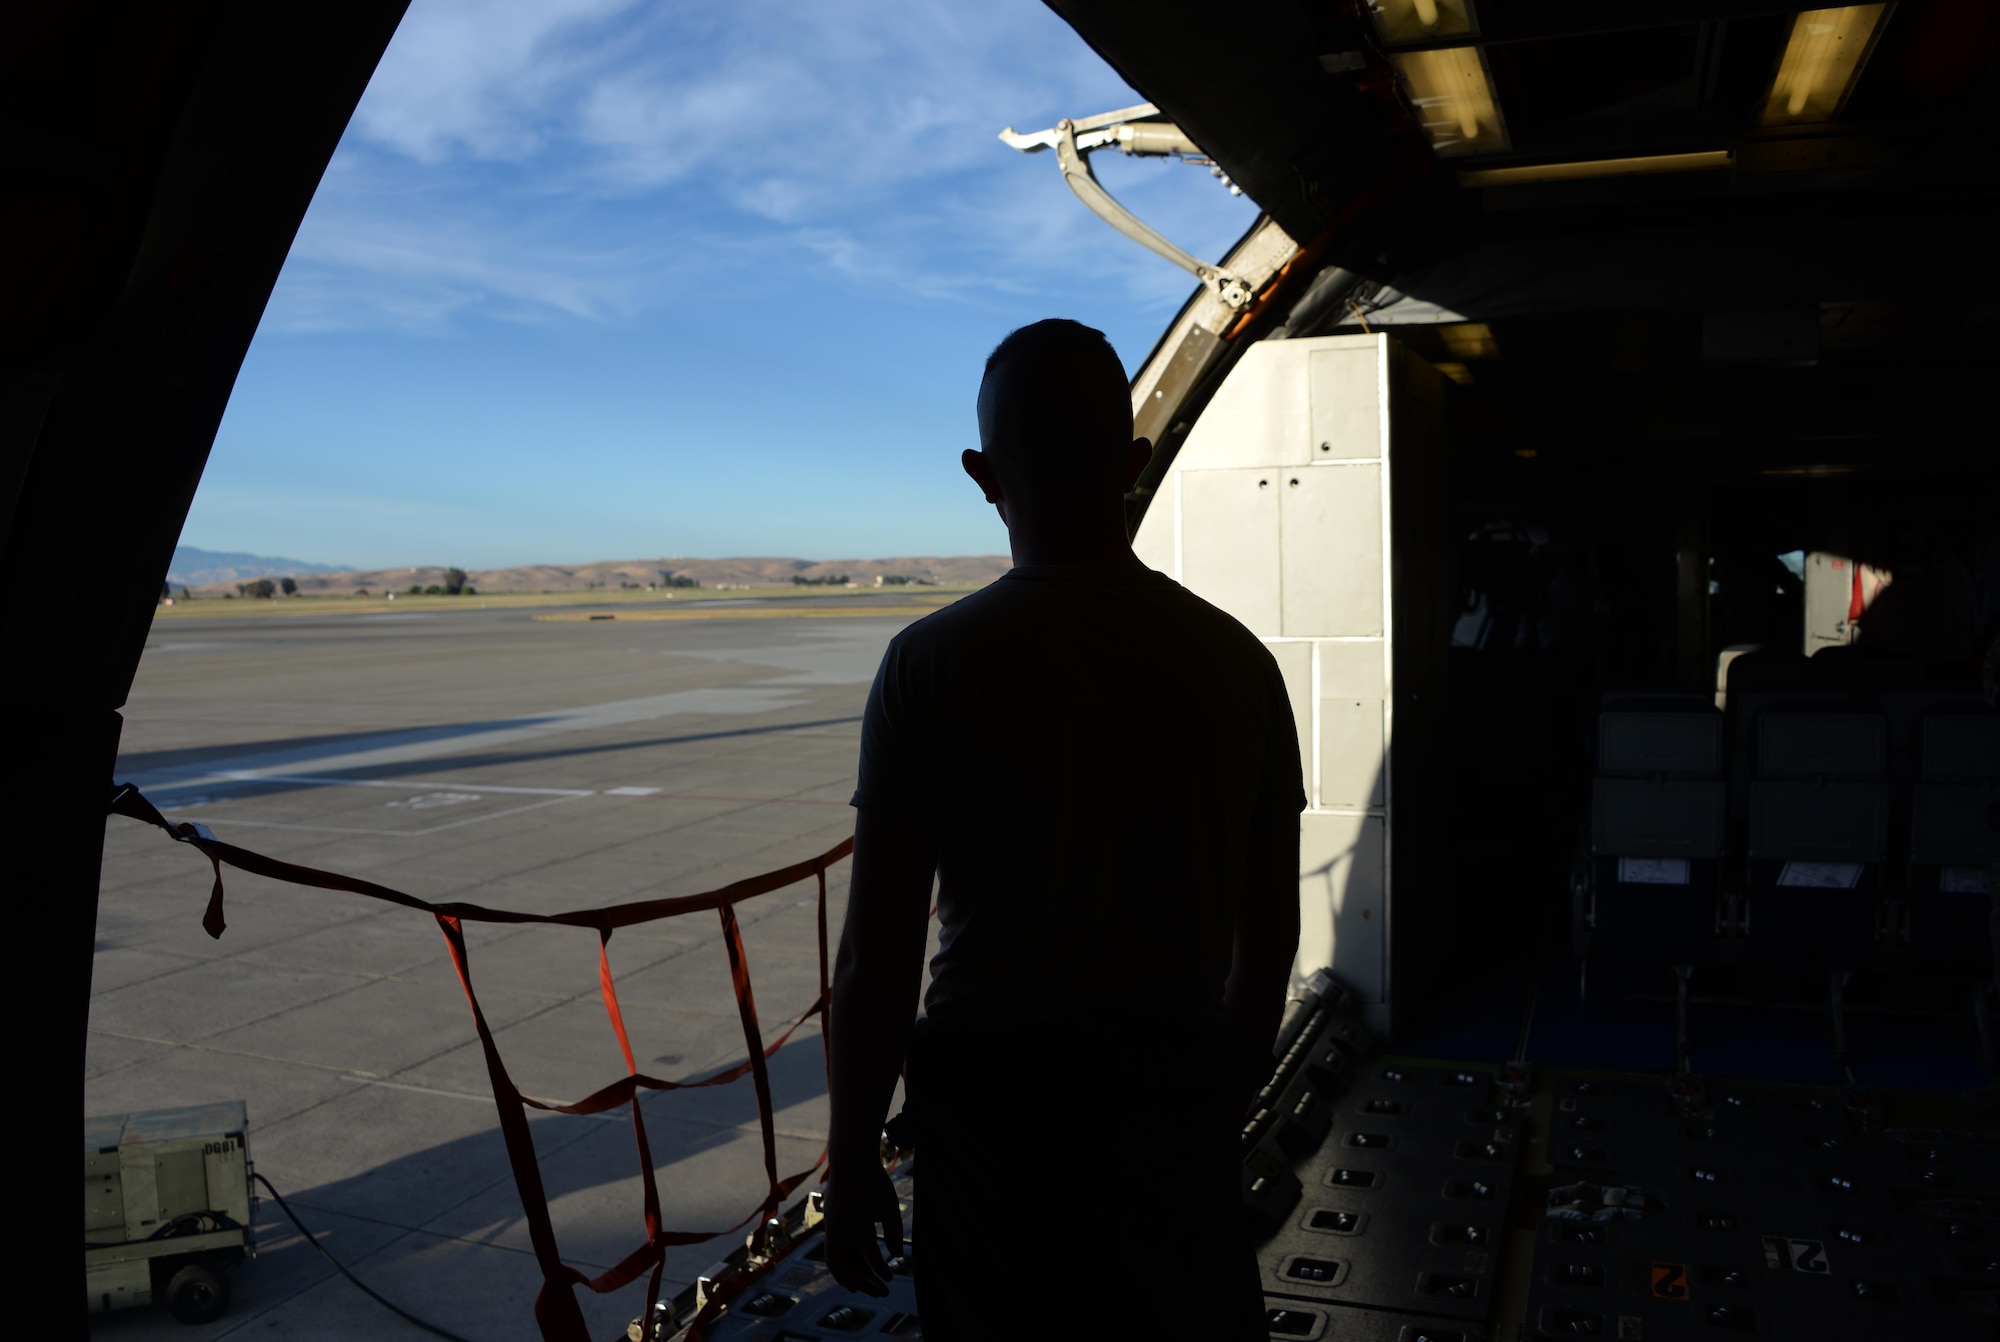 Airman 1st Class Garret Jacobs, 6th Air Refueling Squadron, waits for cargo to arrive inside a KC-10 Extender at Travis Air Force Base, Calif., June 17, 2017. Jacobs helped load more than 15,000 pounds of cargo prior to a flight to Joint Base Pearl Harbor-Hickam, Hawaii. The KC-10 is capable of transporting 170,000 pounds of cargo. (U.S. Air Force photo by Tech. Sgt. James Hodgman)